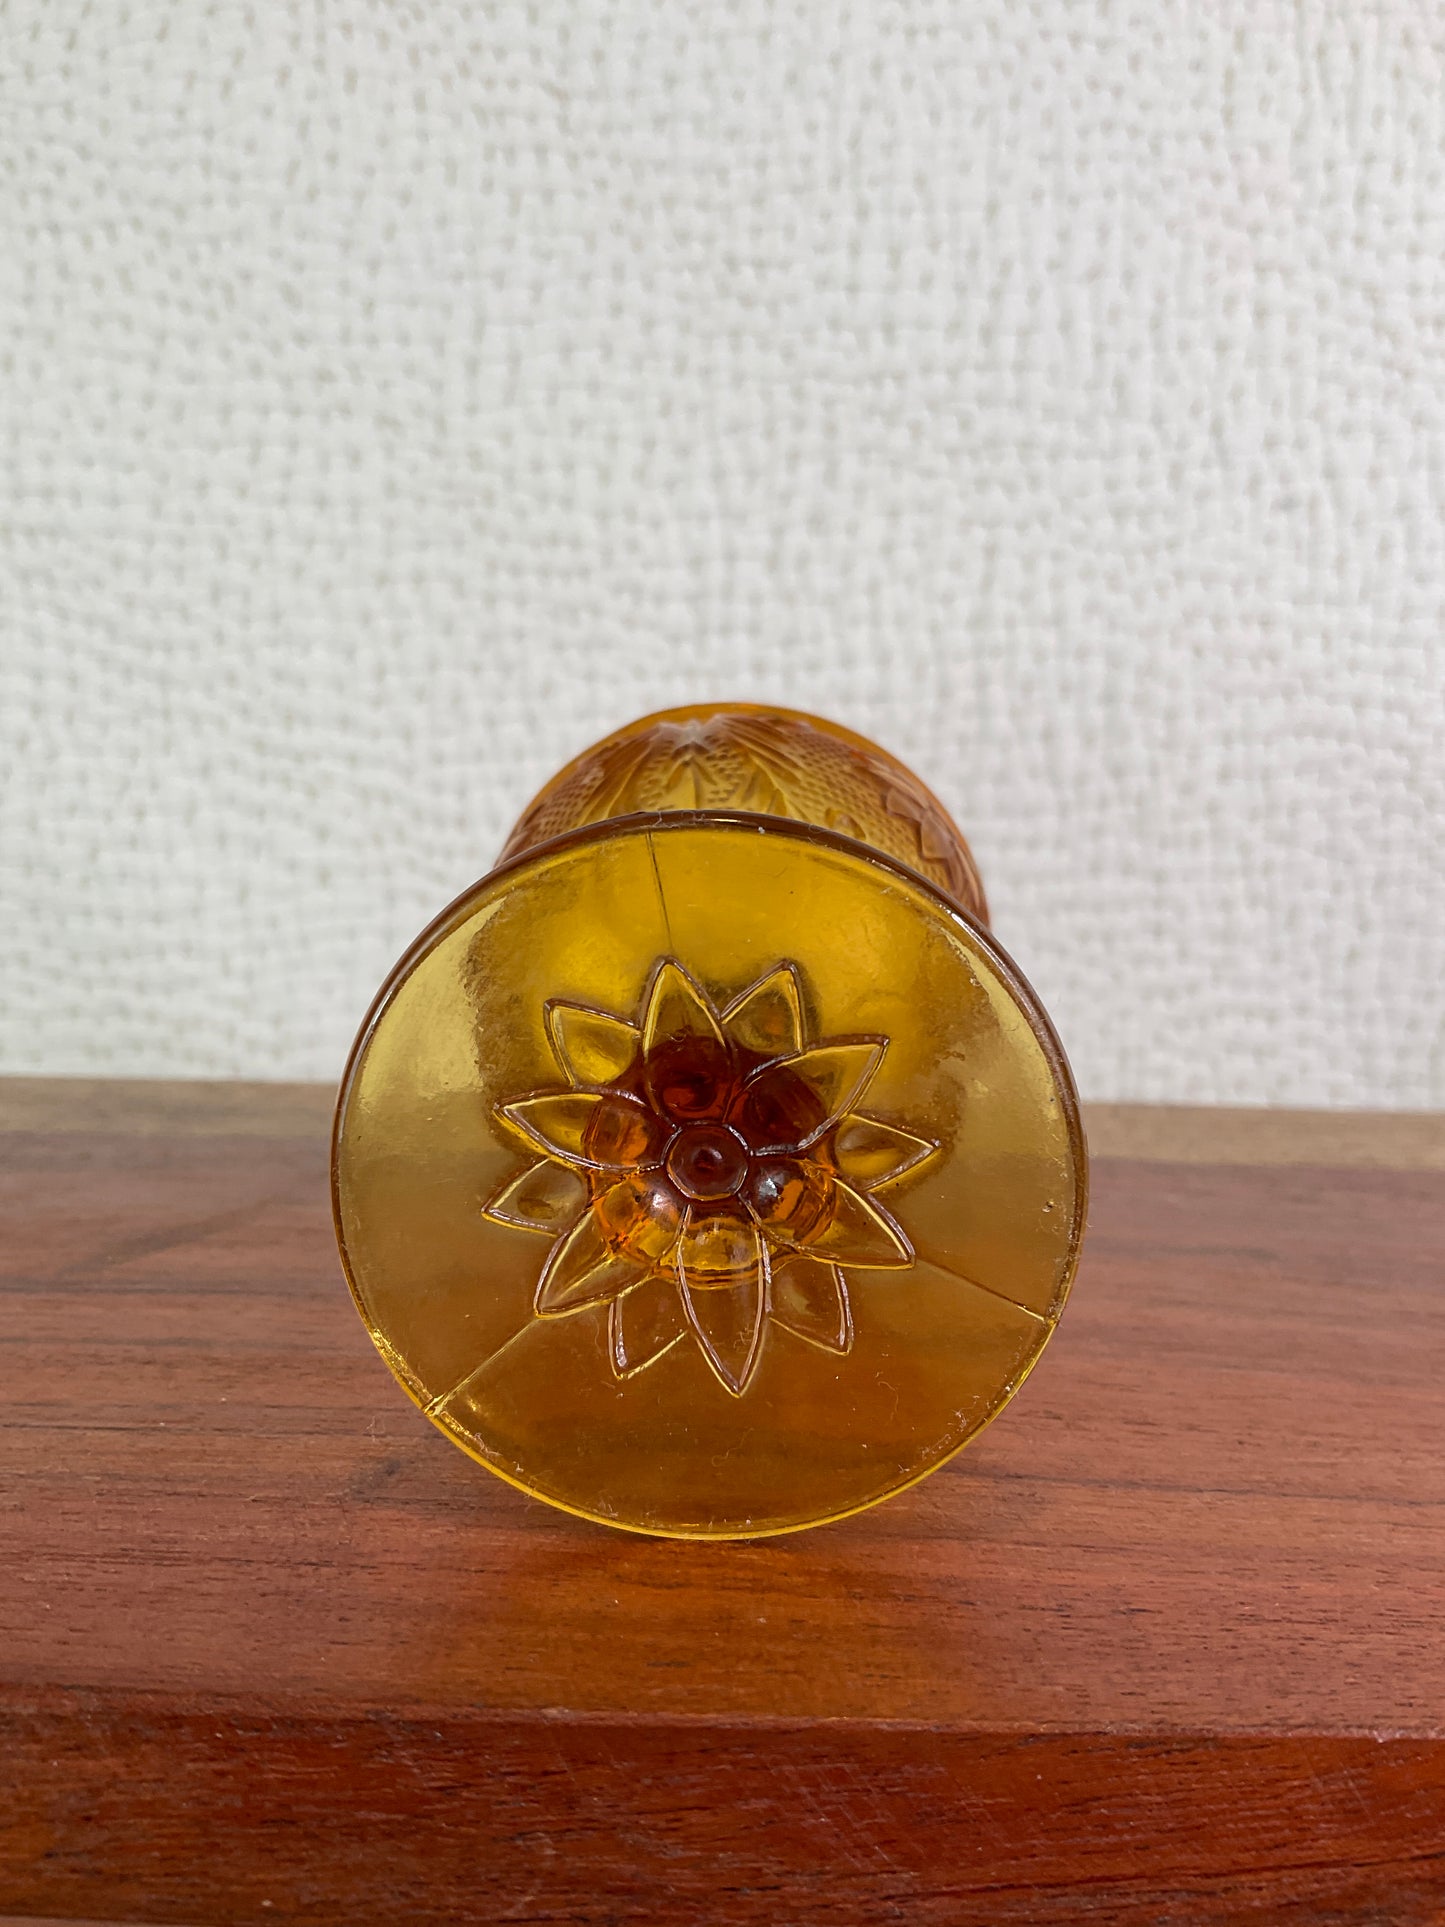 Vintage Amber Glass Dishes, Sold Separately